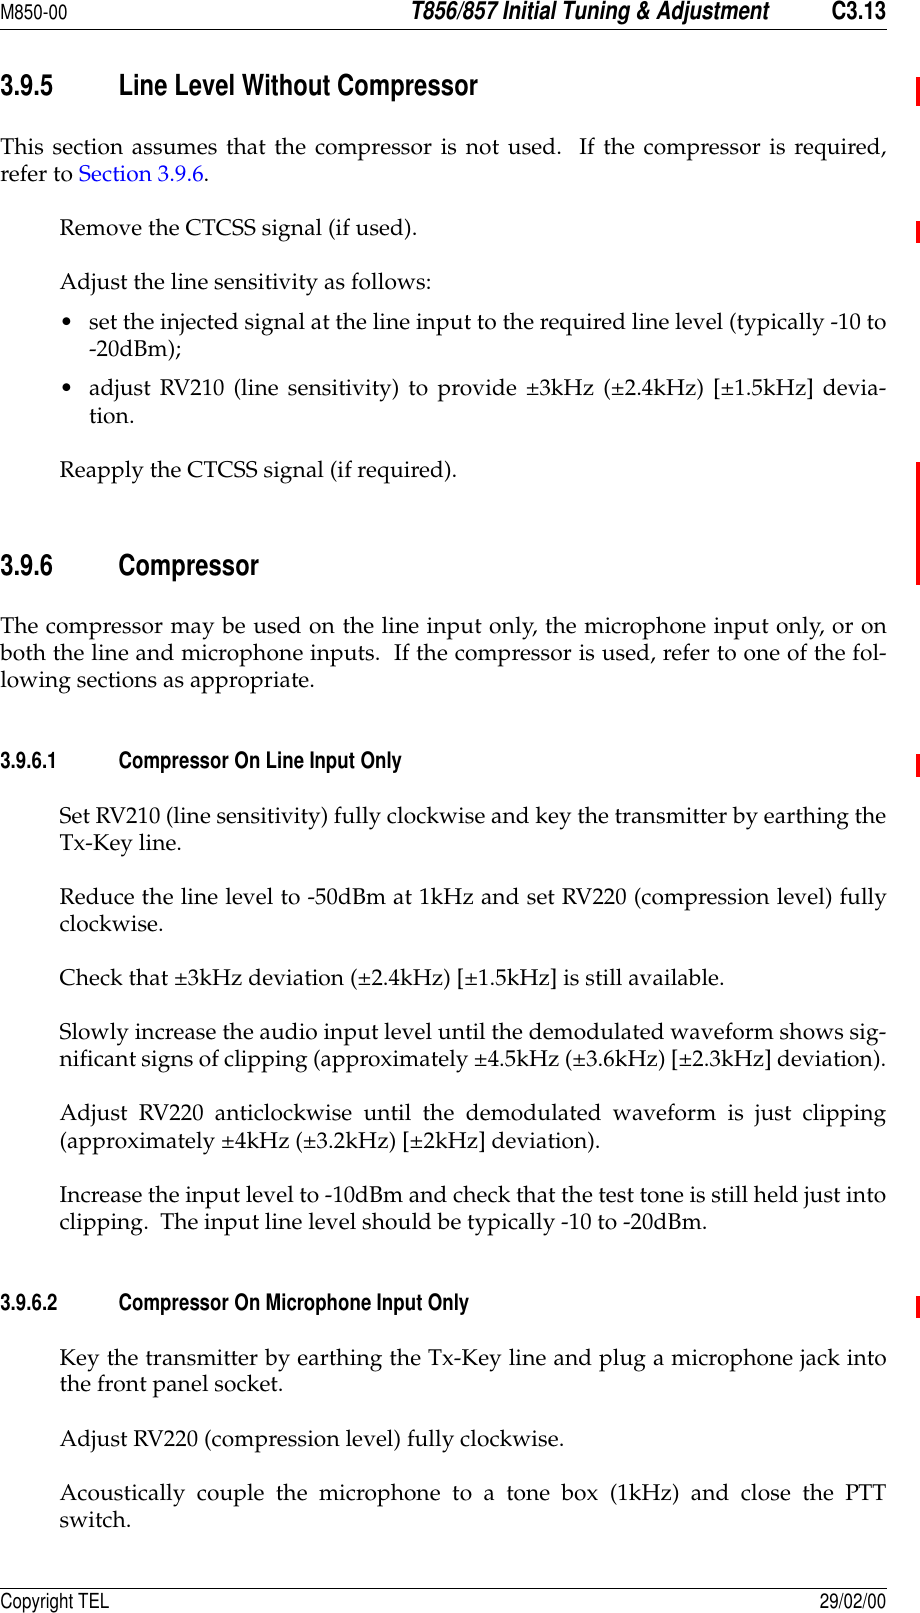 M850-00T856/857 Initial Tuning &amp; AdjustmentC3.13Copyright TEL 29/02/003.9.5 Line Level Without CompressorThis section assumes that the compressor is not used.  If the compressor is required,refer to Section 3.9.6.Remove the CTCSS signal (if used).Adjust the line sensitivity as follows: • set the injected signal at the line input to the required line level (typically -10 to-20dBm);• adjust RV210 (line sensitivity) to provide ±3kHz (±2.4kHz) [±1.5kHz] devia-tion.Reapply the CTCSS signal (if required).3.9.6 CompressorThe compressor may be used on the line input only, the microphone input only, or onboth the line and microphone inputs.  If the compressor is used, refer to one of the fol-lowing sections as appropriate.3.9.6.1 Compressor On Line Input OnlySet RV210 (line sensitivity) fully clockwise and key the transmitter by earthing theTx-Key line.Reduce the line level to -50dBm at 1kHz and set RV220 (compression level) fullyclockwise.Check that ±3kHz deviation (±2.4kHz) [±1.5kHz] is still available.Slowly increase the audio input level until the demodulated waveform shows sig-nificant signs of clipping (approximately ±4.5kHz (±3.6kHz) [±2.3kHz] deviation).Adjust RV220 anticlockwise until the demodulated waveform is just clipping(approximately ±4kHz (±3.2kHz) [±2kHz] deviation).Increase the input level to -10dBm and check that the test tone is still held just intoclipping.  The input line level should be typically -10 to -20dBm.3.9.6.2 Compressor On Microphone Input OnlyKey the transmitter by earthing the Tx-Key line and plug a microphone jack intothe front panel socket.Adjust RV220 (compression level) fully clockwise.Acoustically couple the microphone to a tone box (1kHz) and close the PTTswitch.